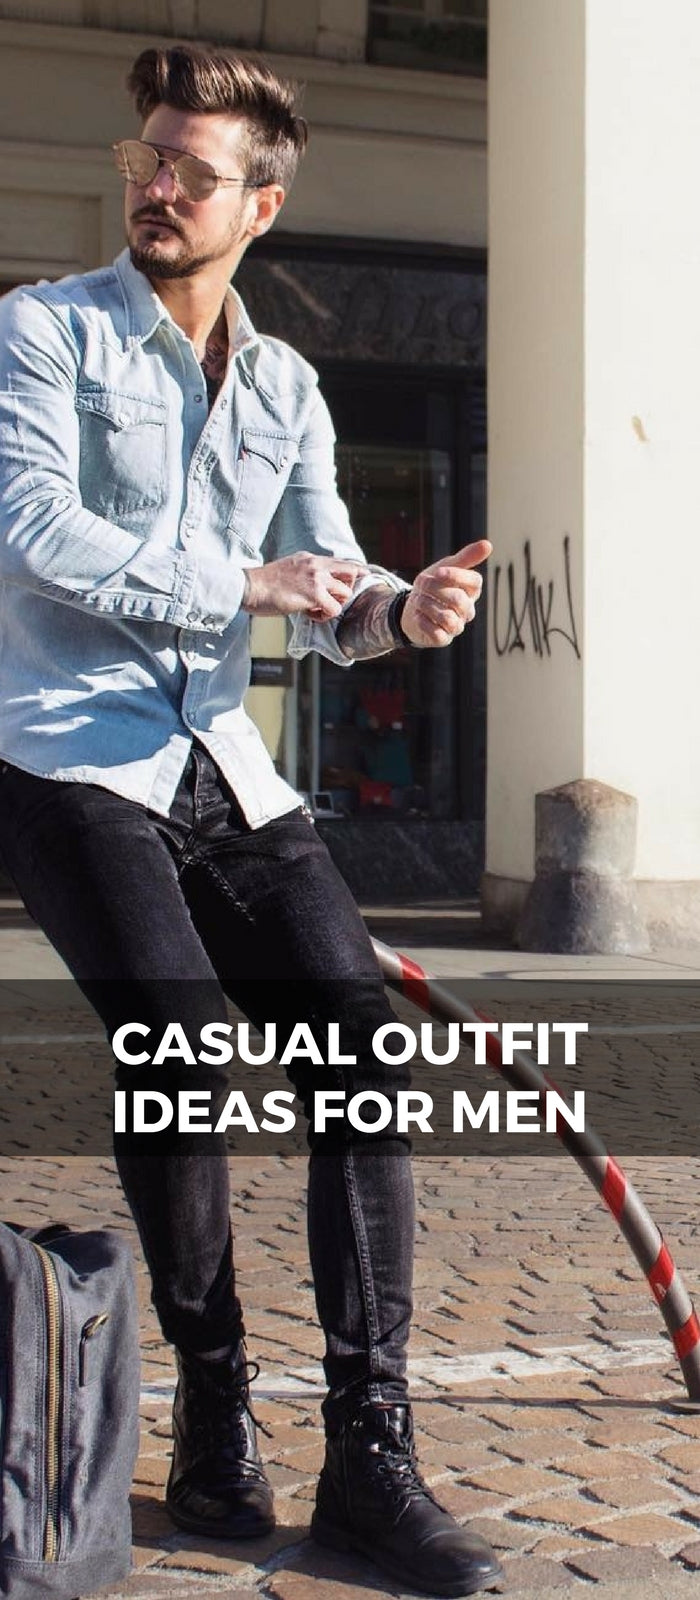 Casual Outfit Ideas For Men